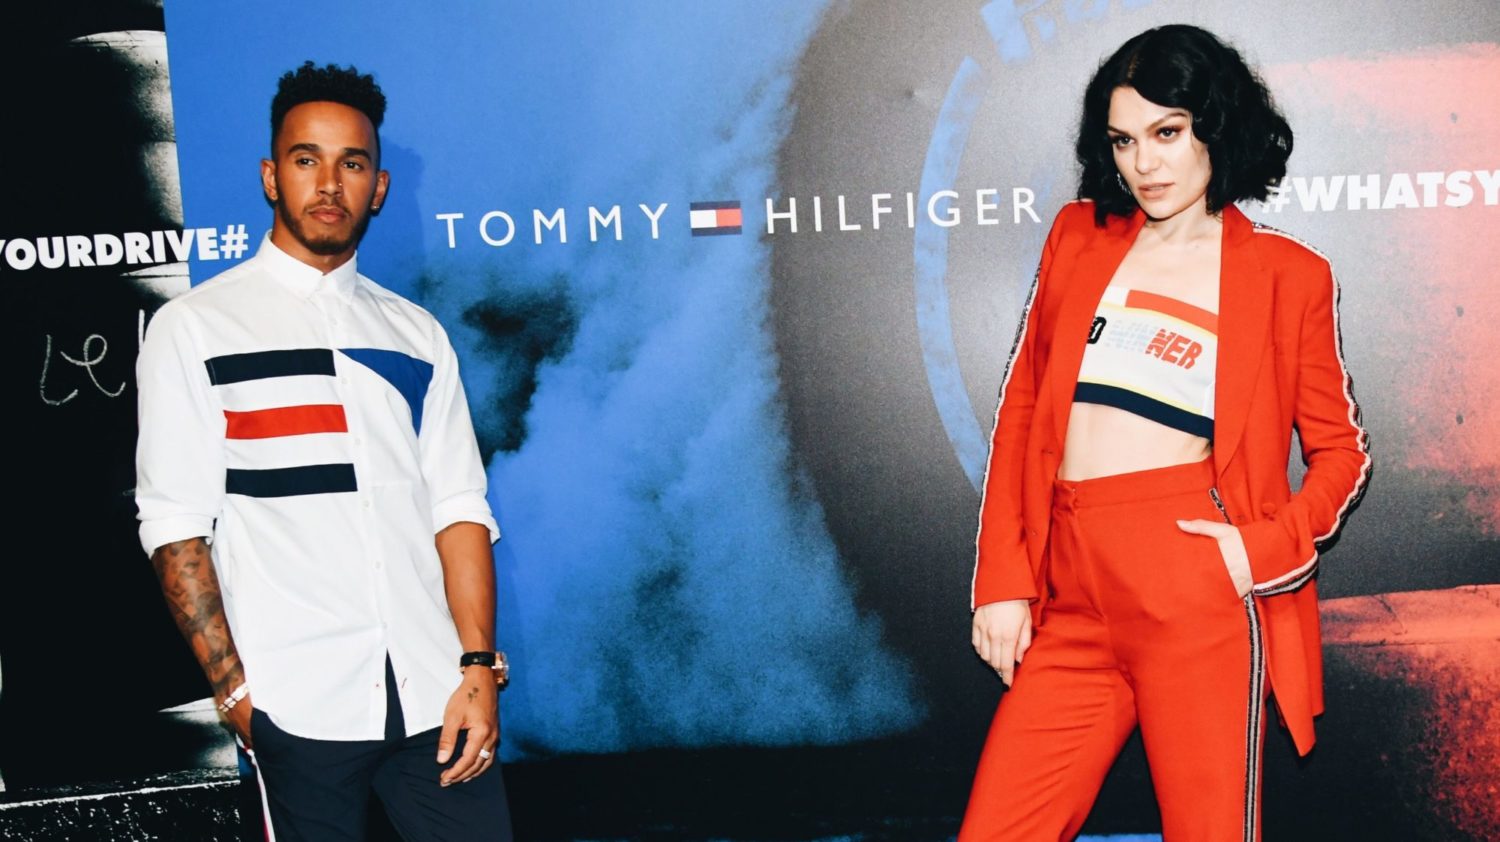 Exotic Animal Skins Are Now Banned at Calvin Klein, Tommy Hilfiger